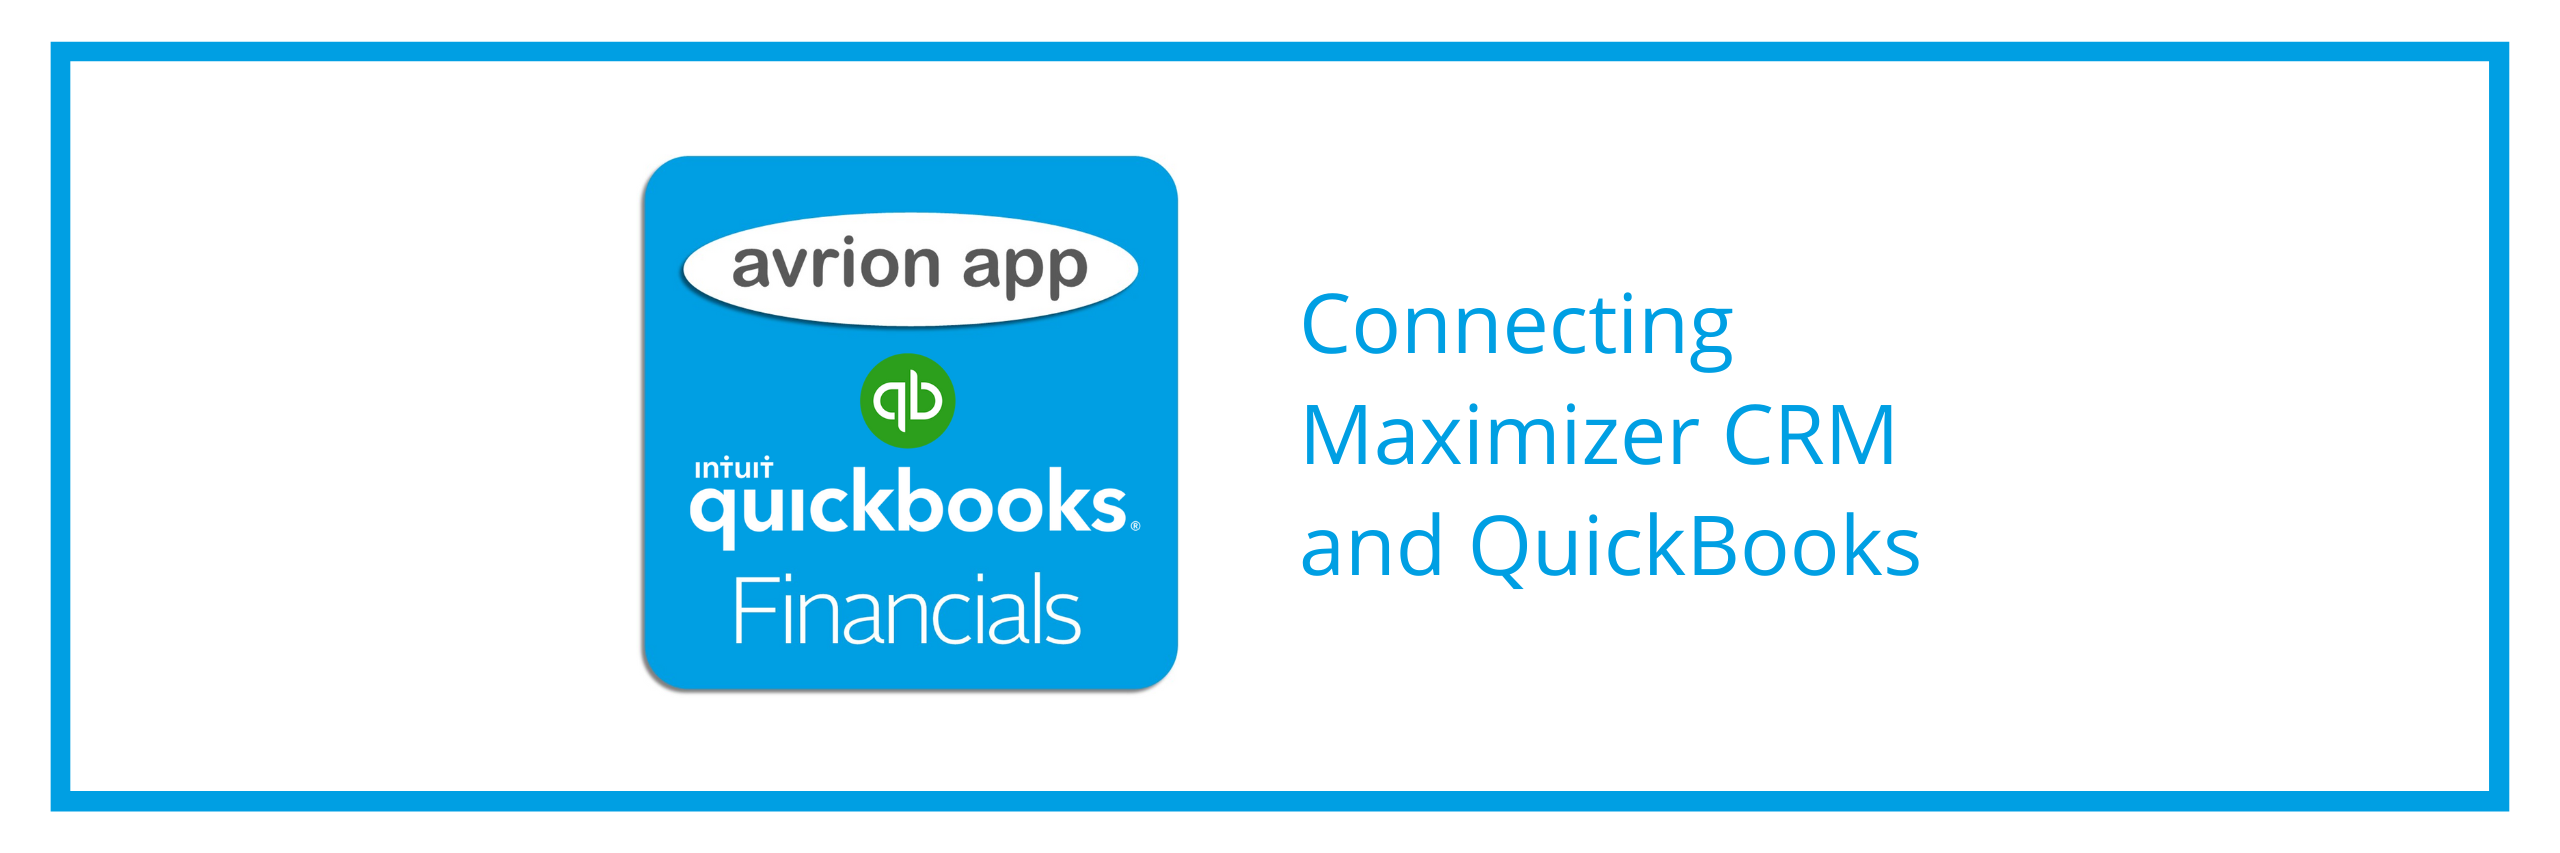 Financials for QuickBooks - Connecting Maximizer CRM and QuickBooks